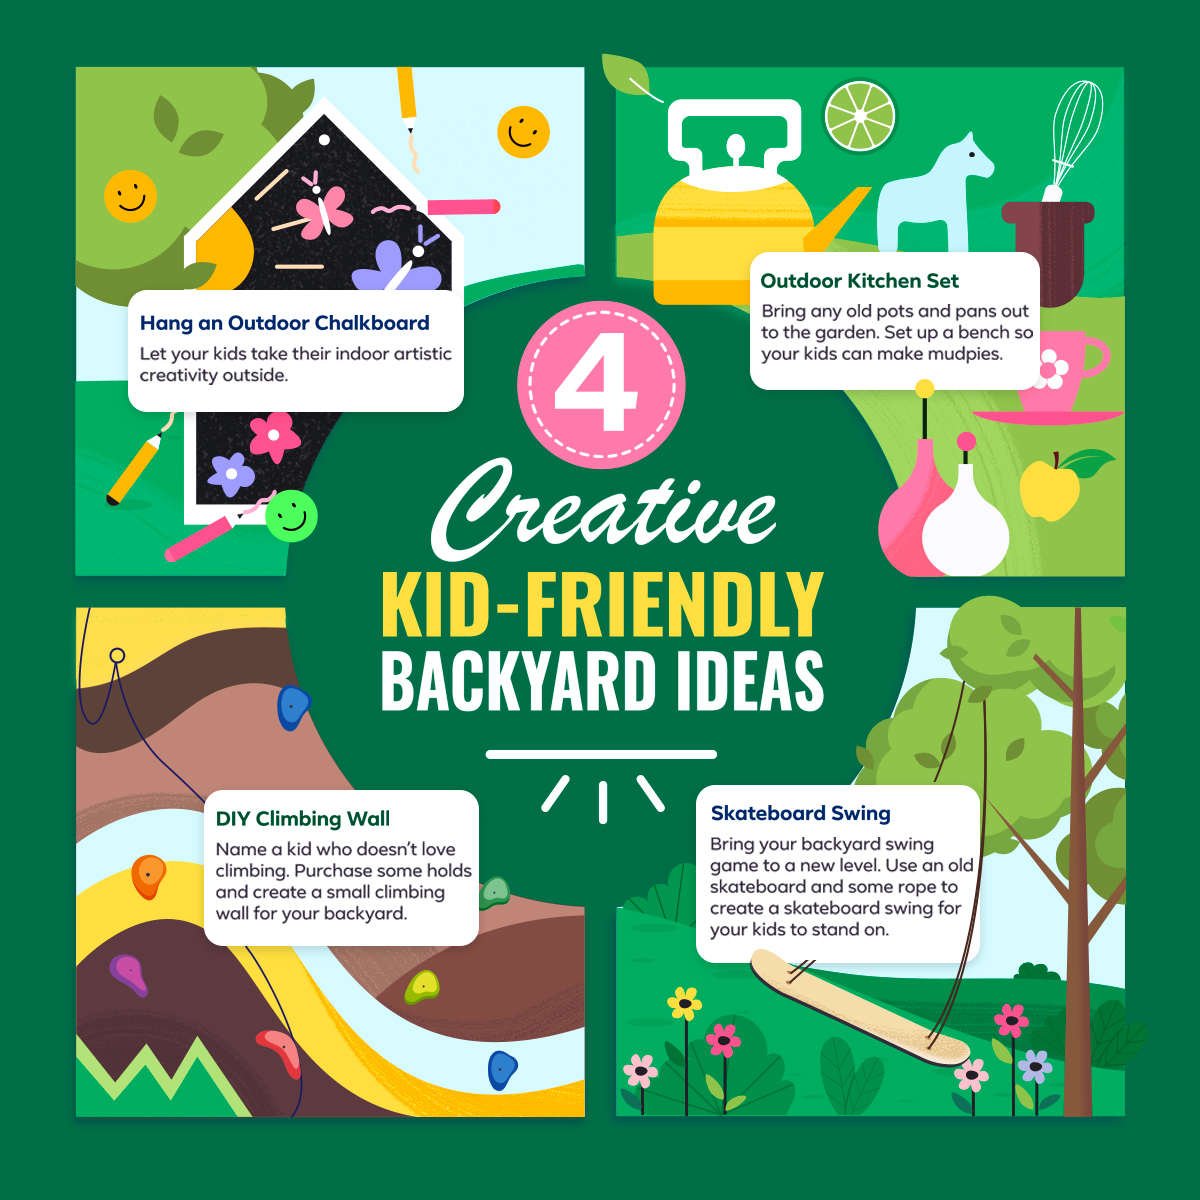 With summer almost officially here, your kids are going to want to get outside. Here are a few creative ways to make your yard a kid’s paradise! 😎🌻
#Summer2022 #SummerFun #FamilyFun #CyndiLesinskiandAssociates #RealtorWithACause #BeKind #BeNice